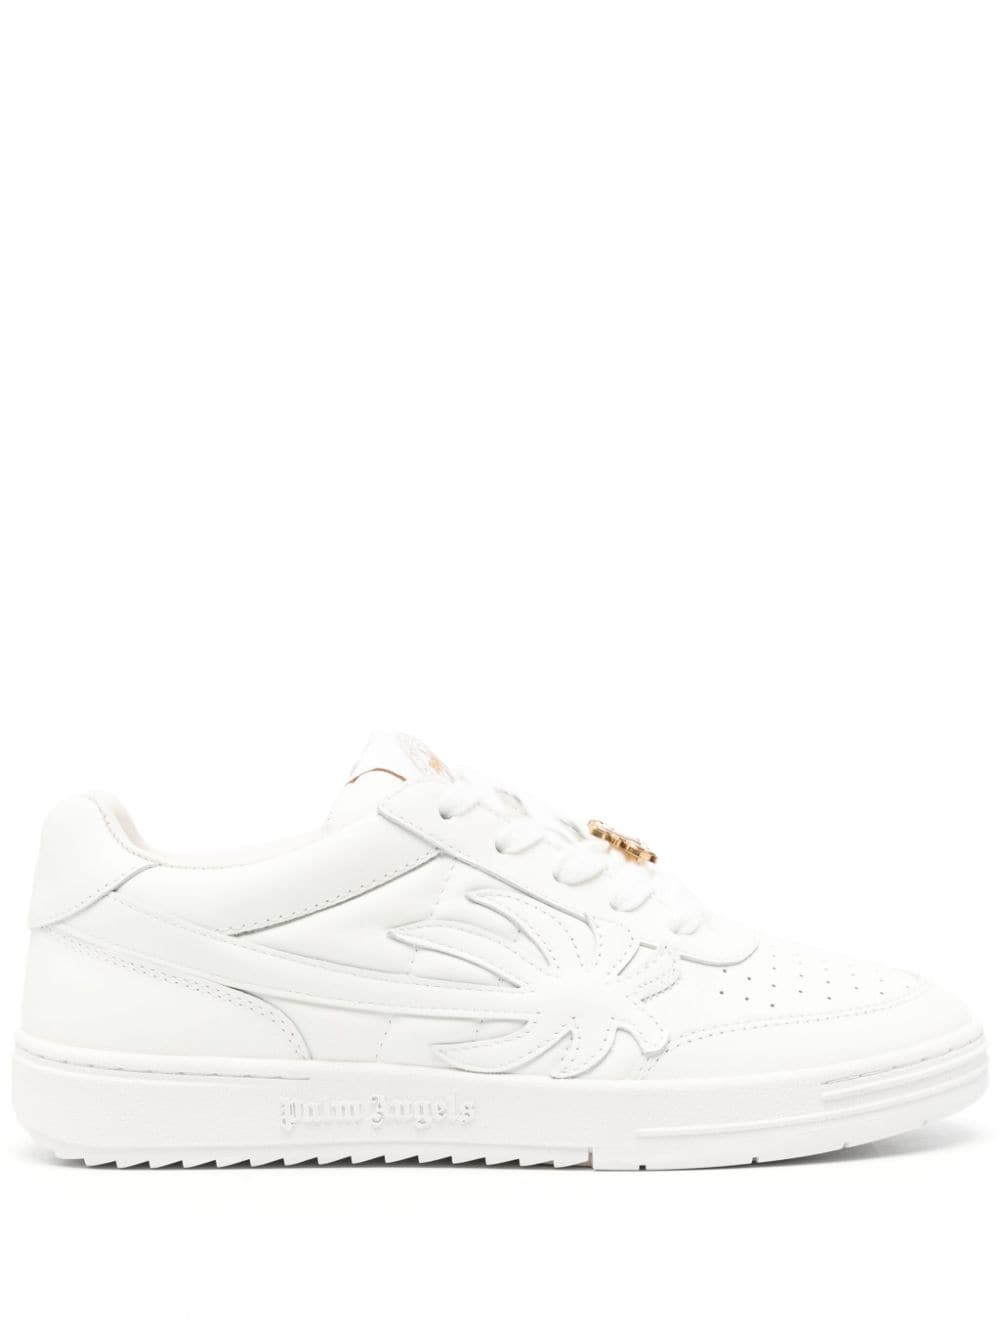 Palm Beach University leather sneakers